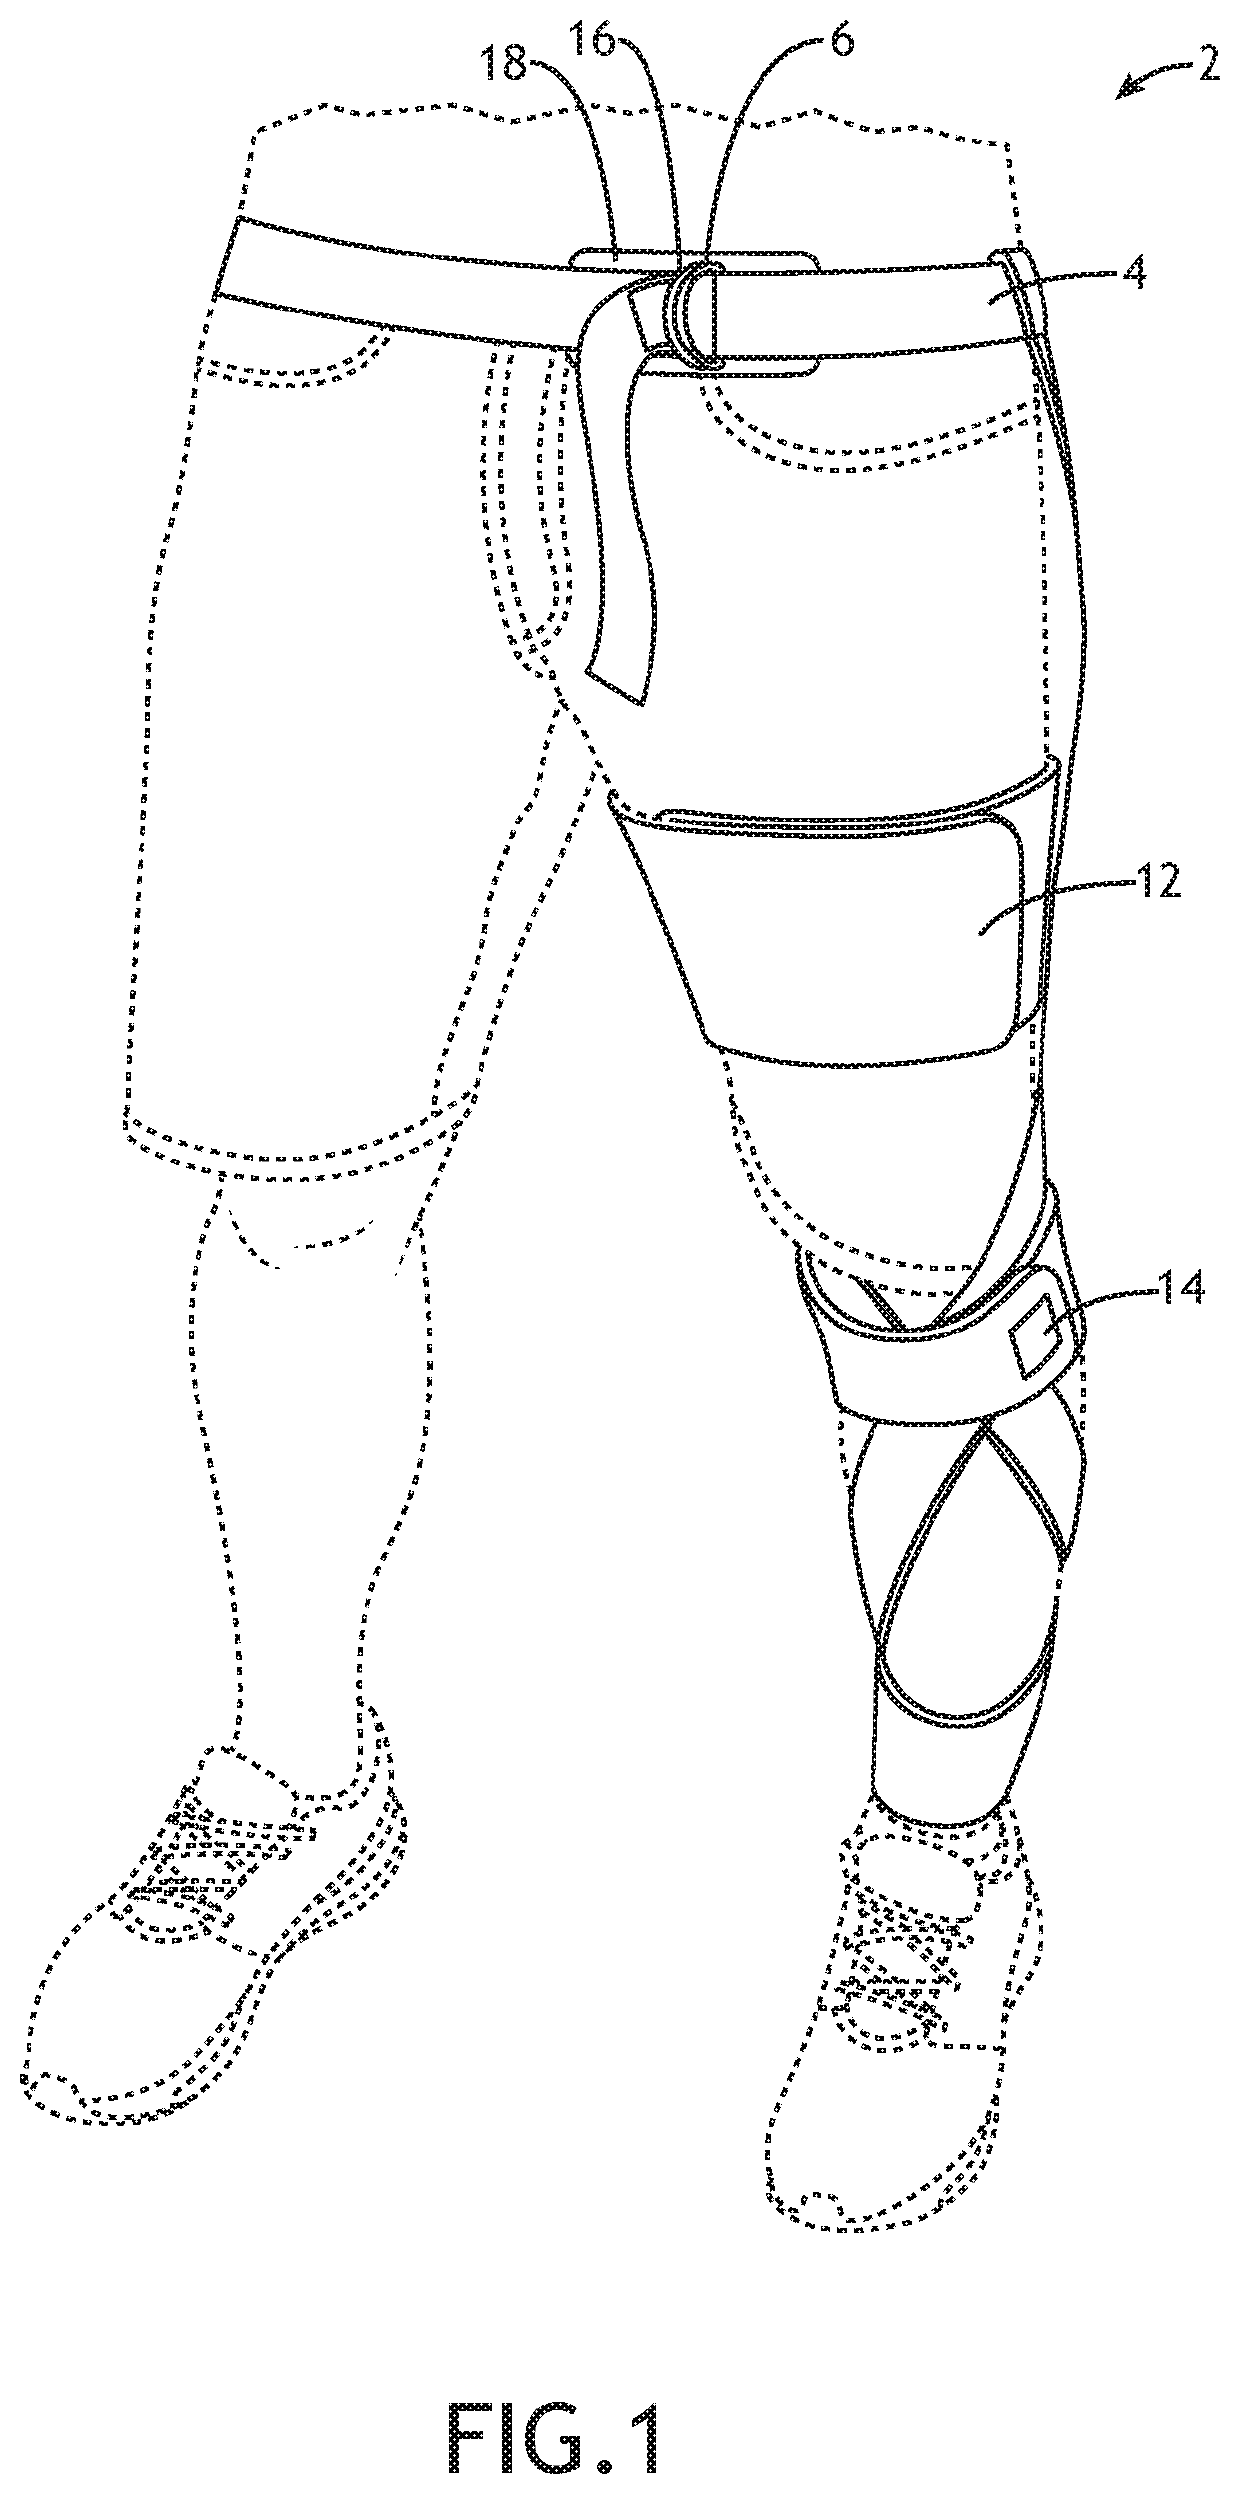 Hamstring Assist Device